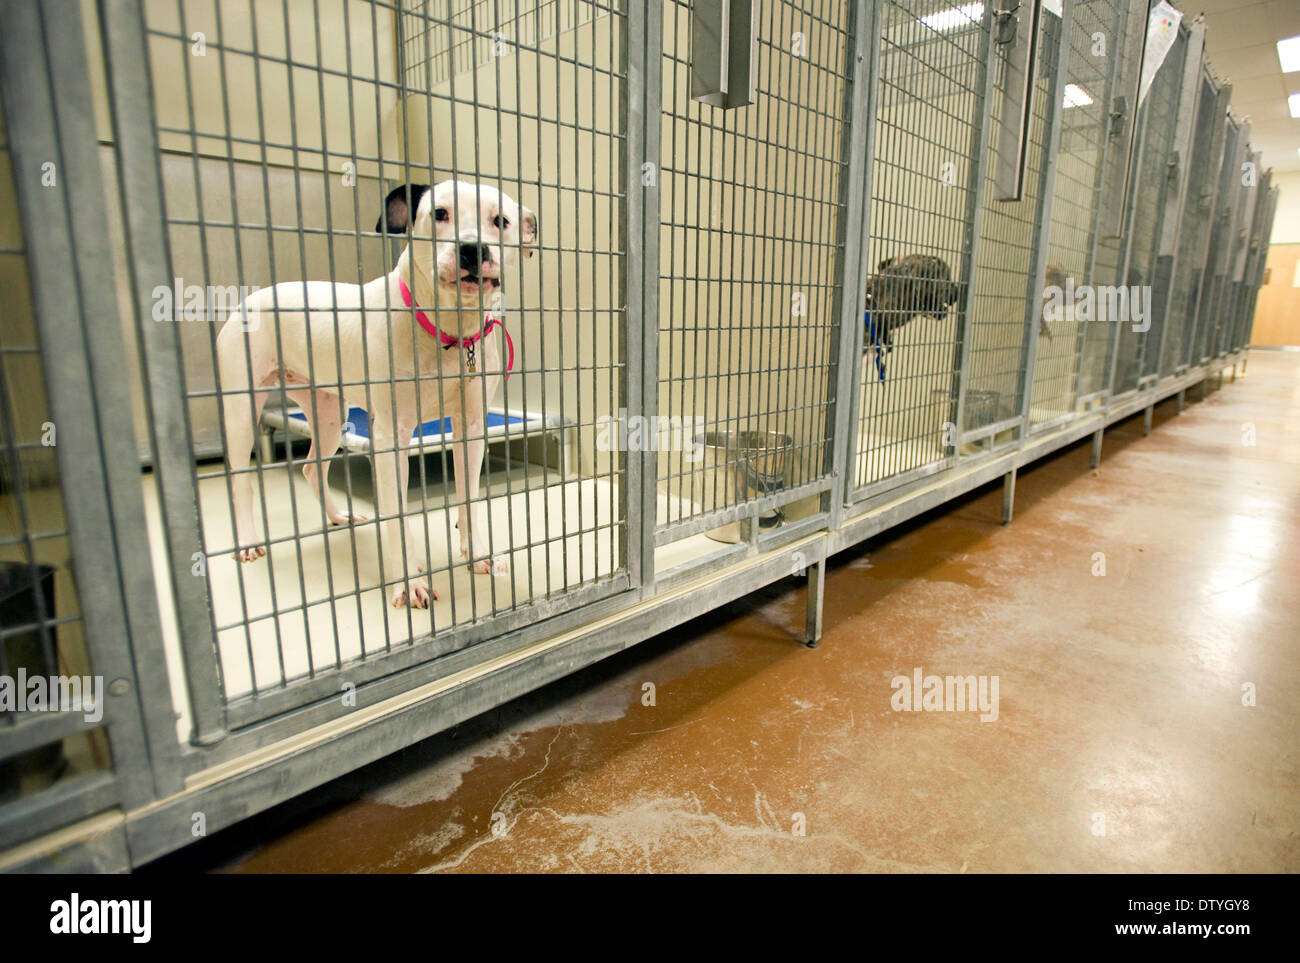 Pitbulls in the cage at Animal shelter in Philadelphia, Pa Stock Photo -  Alamy